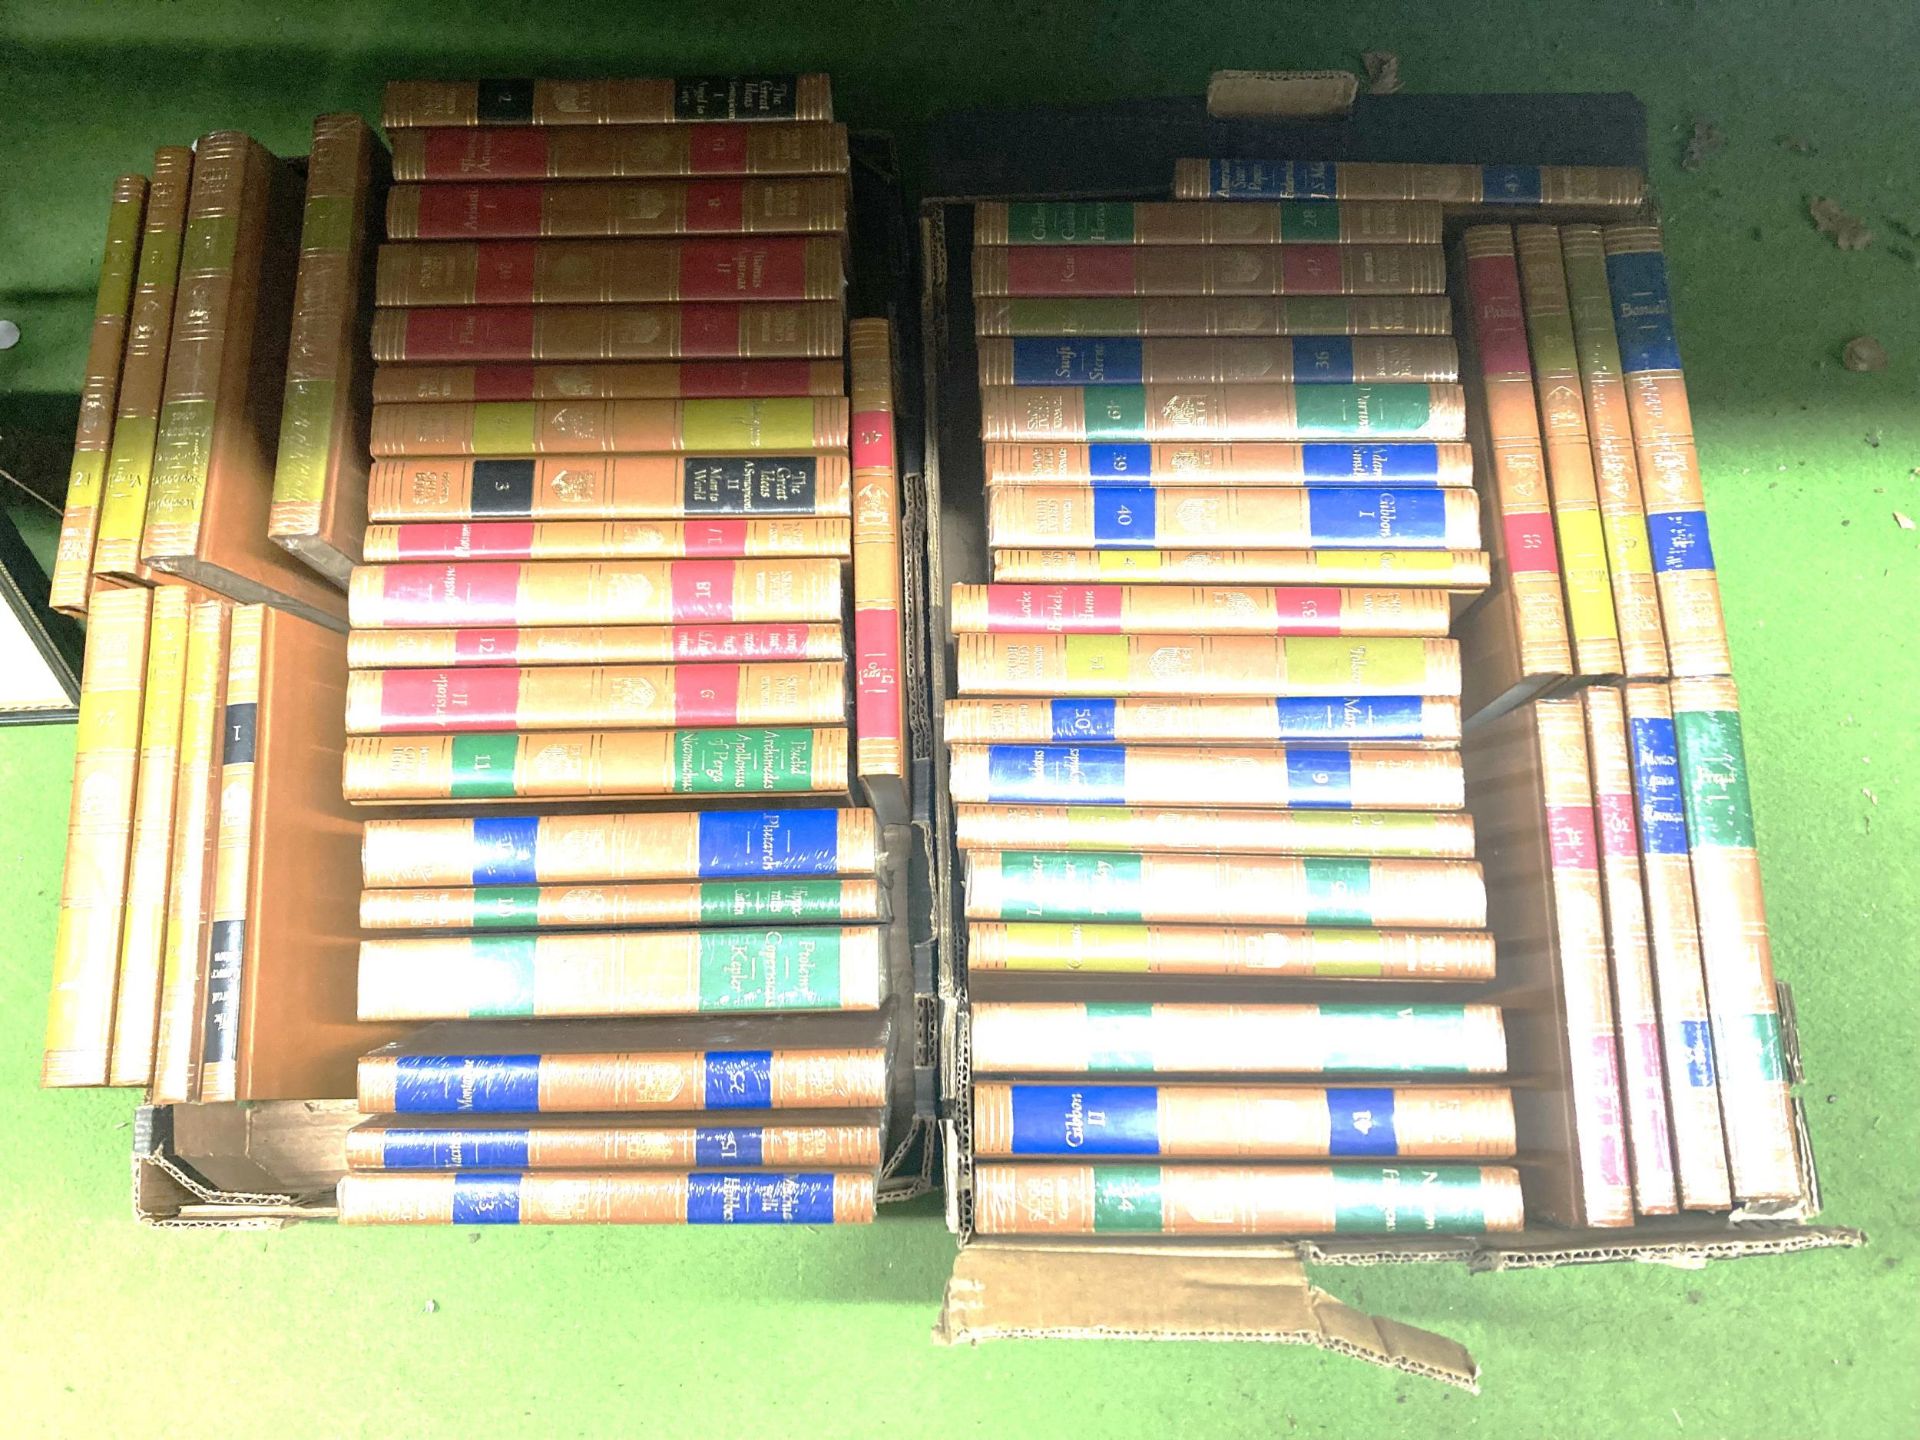 A FULL SET OF BRITANNICA GREAT HARDBACK BOOKS TO INCLUDE ARCHIMEDES, PLUTARCH, TOLSTOY AND MARX.